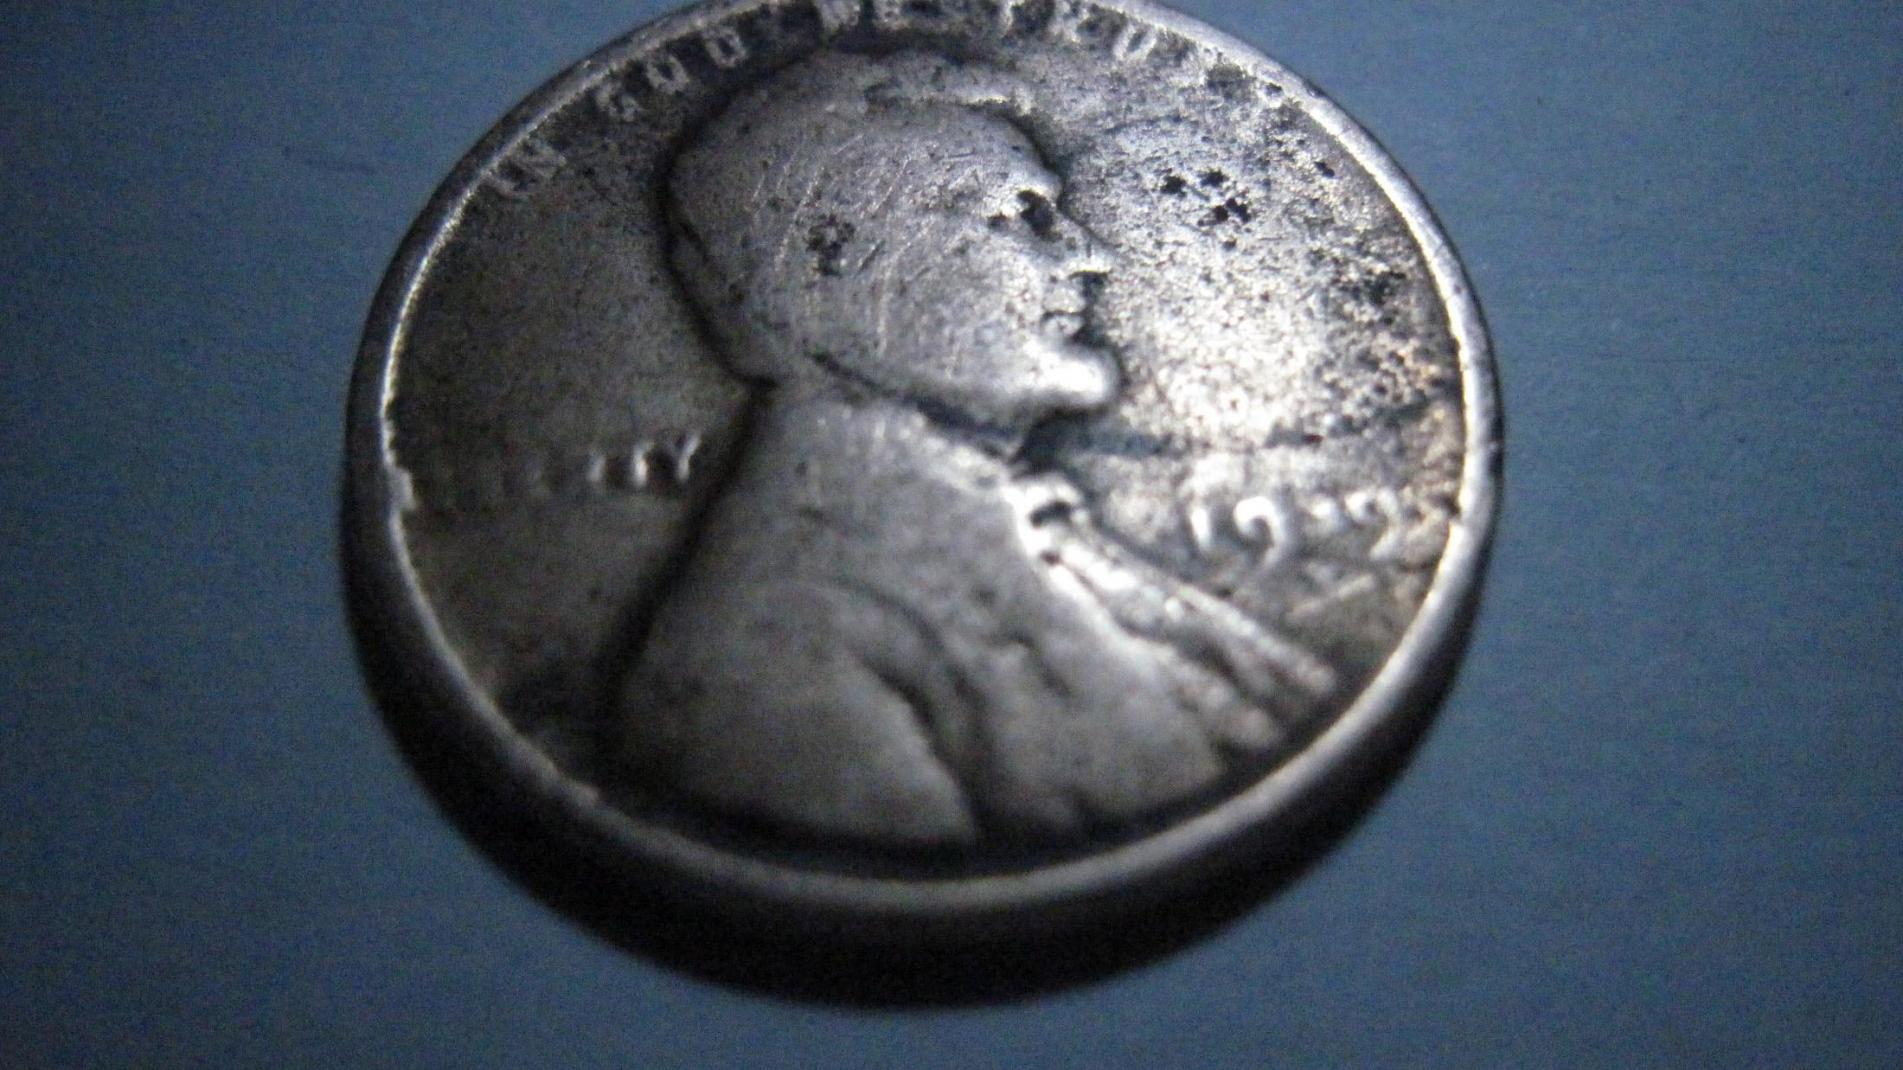 Lincoln ghost image cent speaks for itsself.jpg